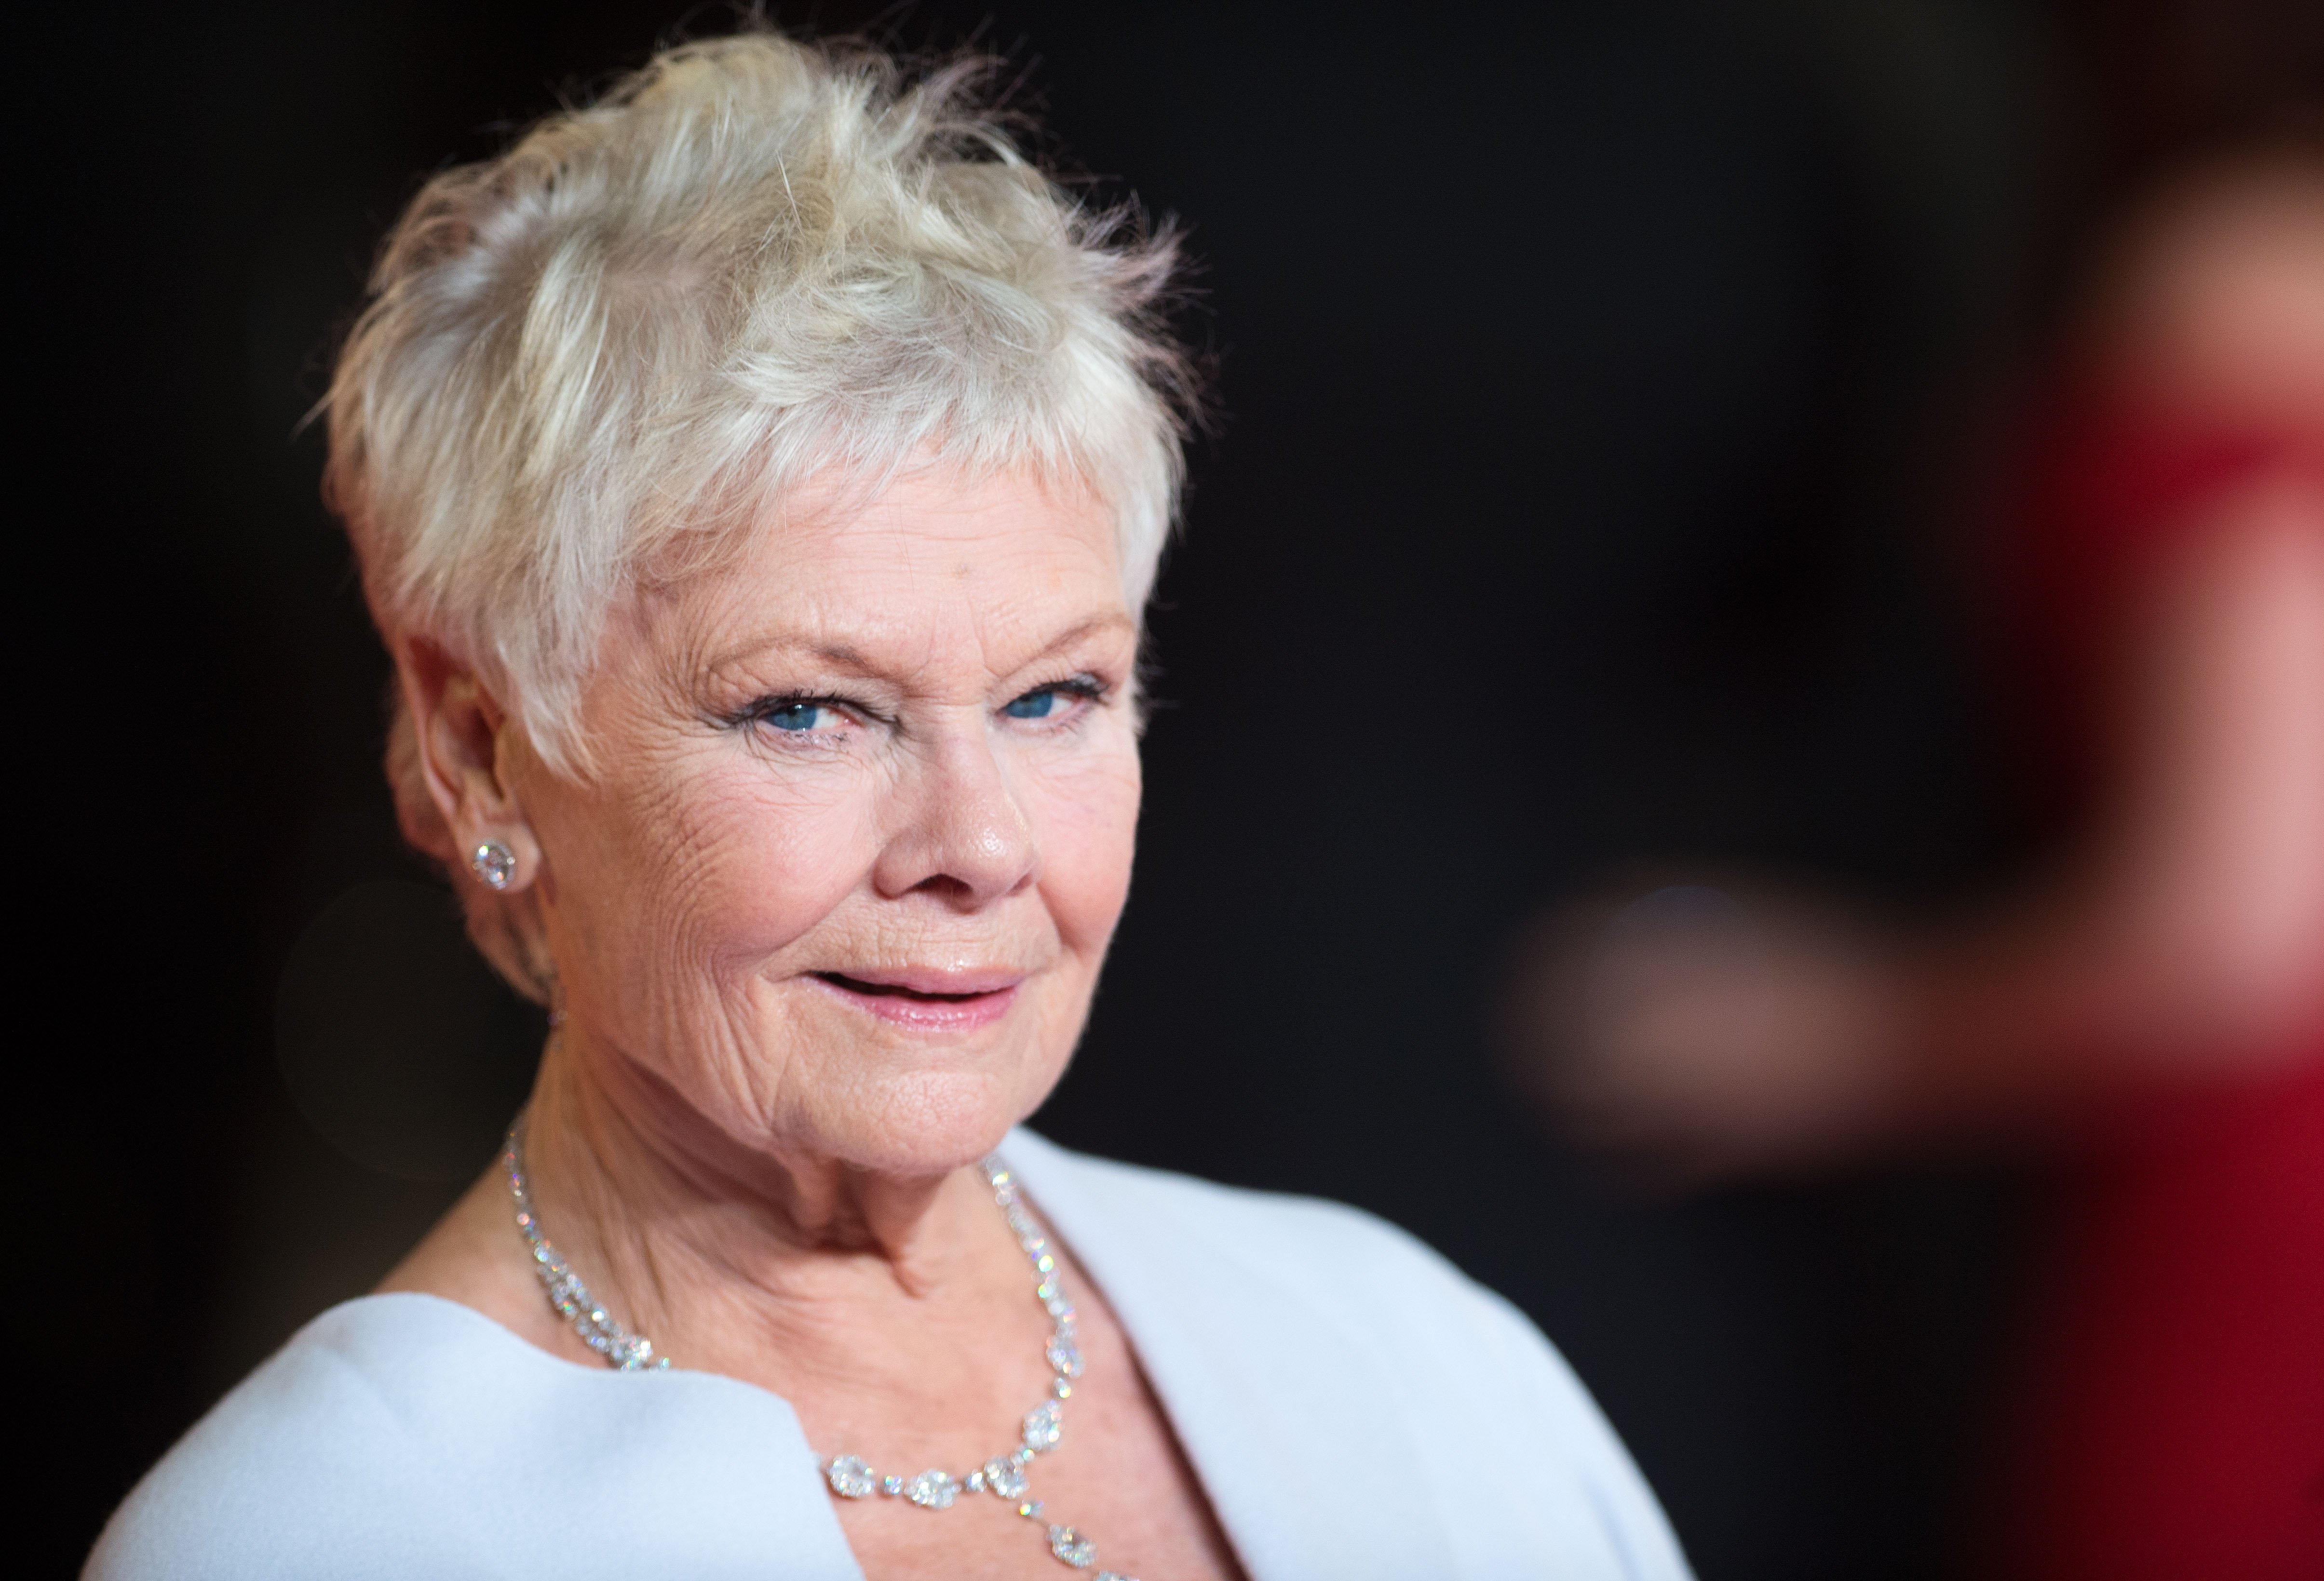 Dame Judi Dench attends the Royal World Premiere of 'Skyfall' at the Royal Albert Hall on October 23, 2012 in London, England | Photo: Getty Images